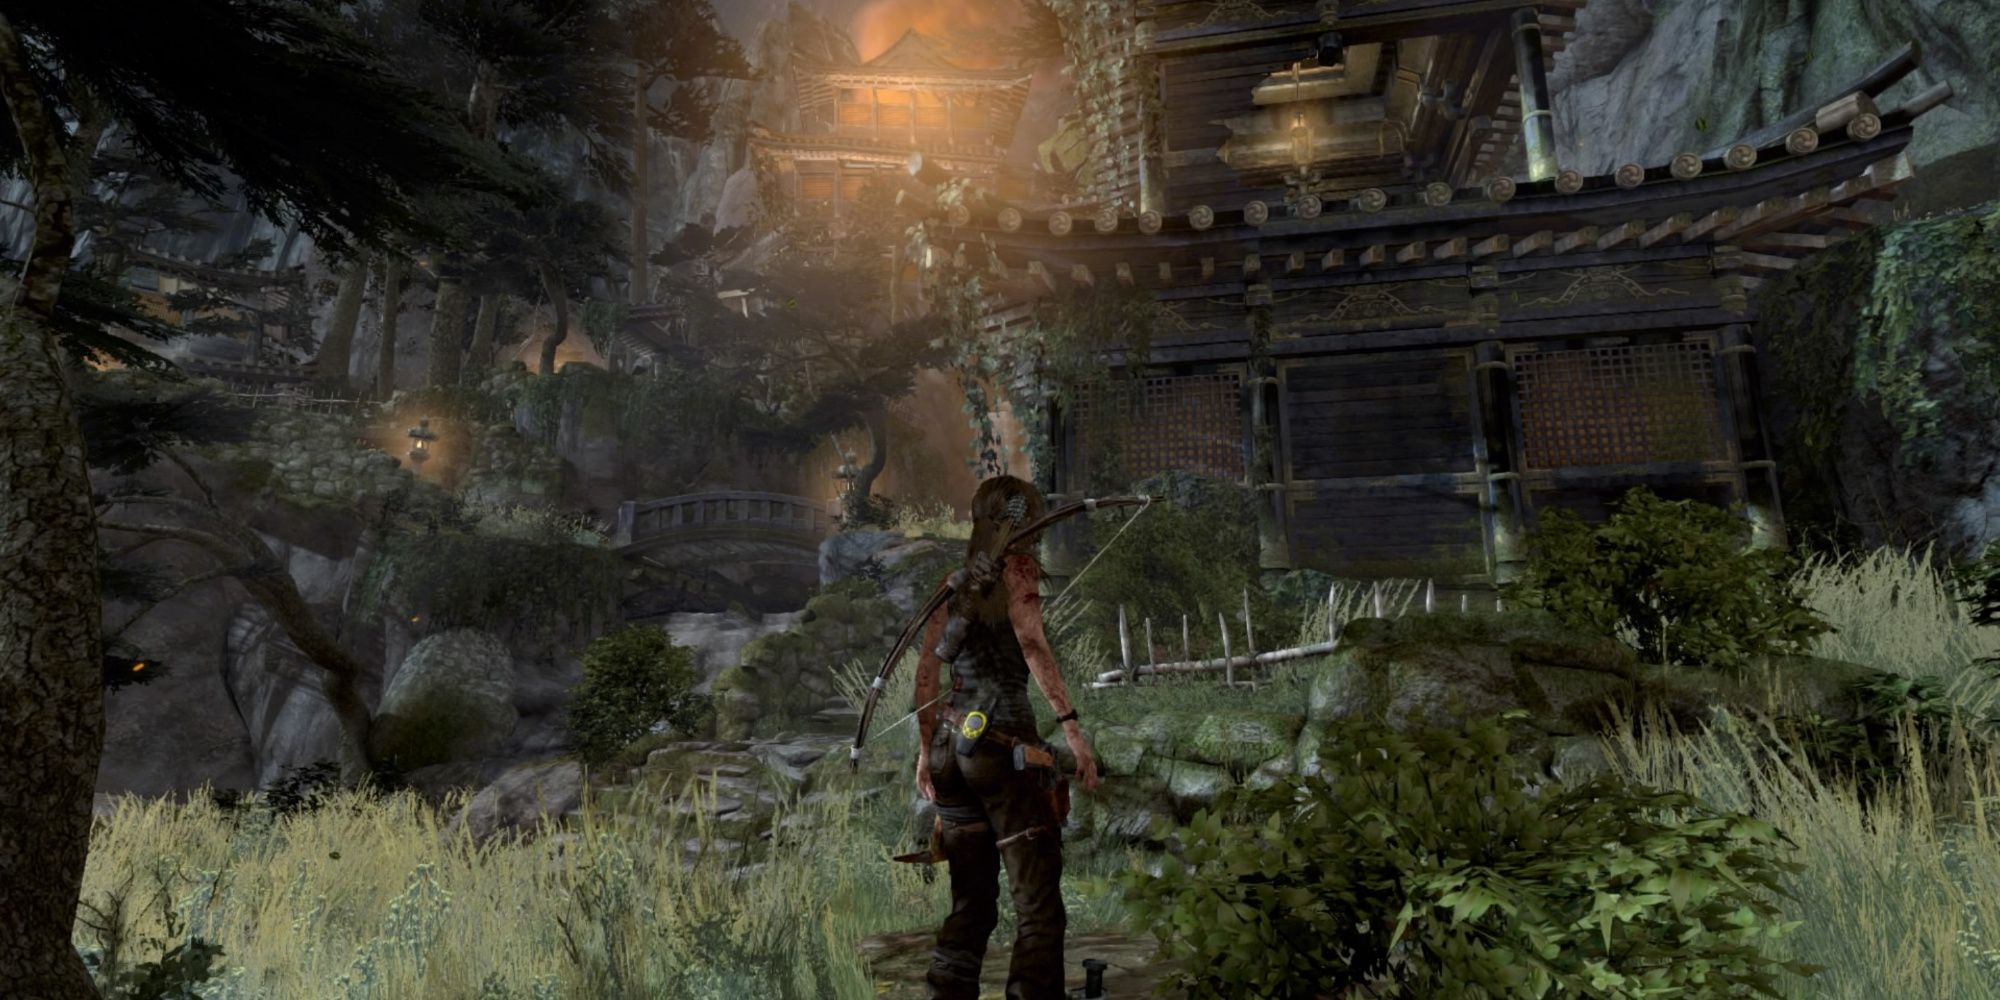 Exploring the world in Tomb Raider (2013)